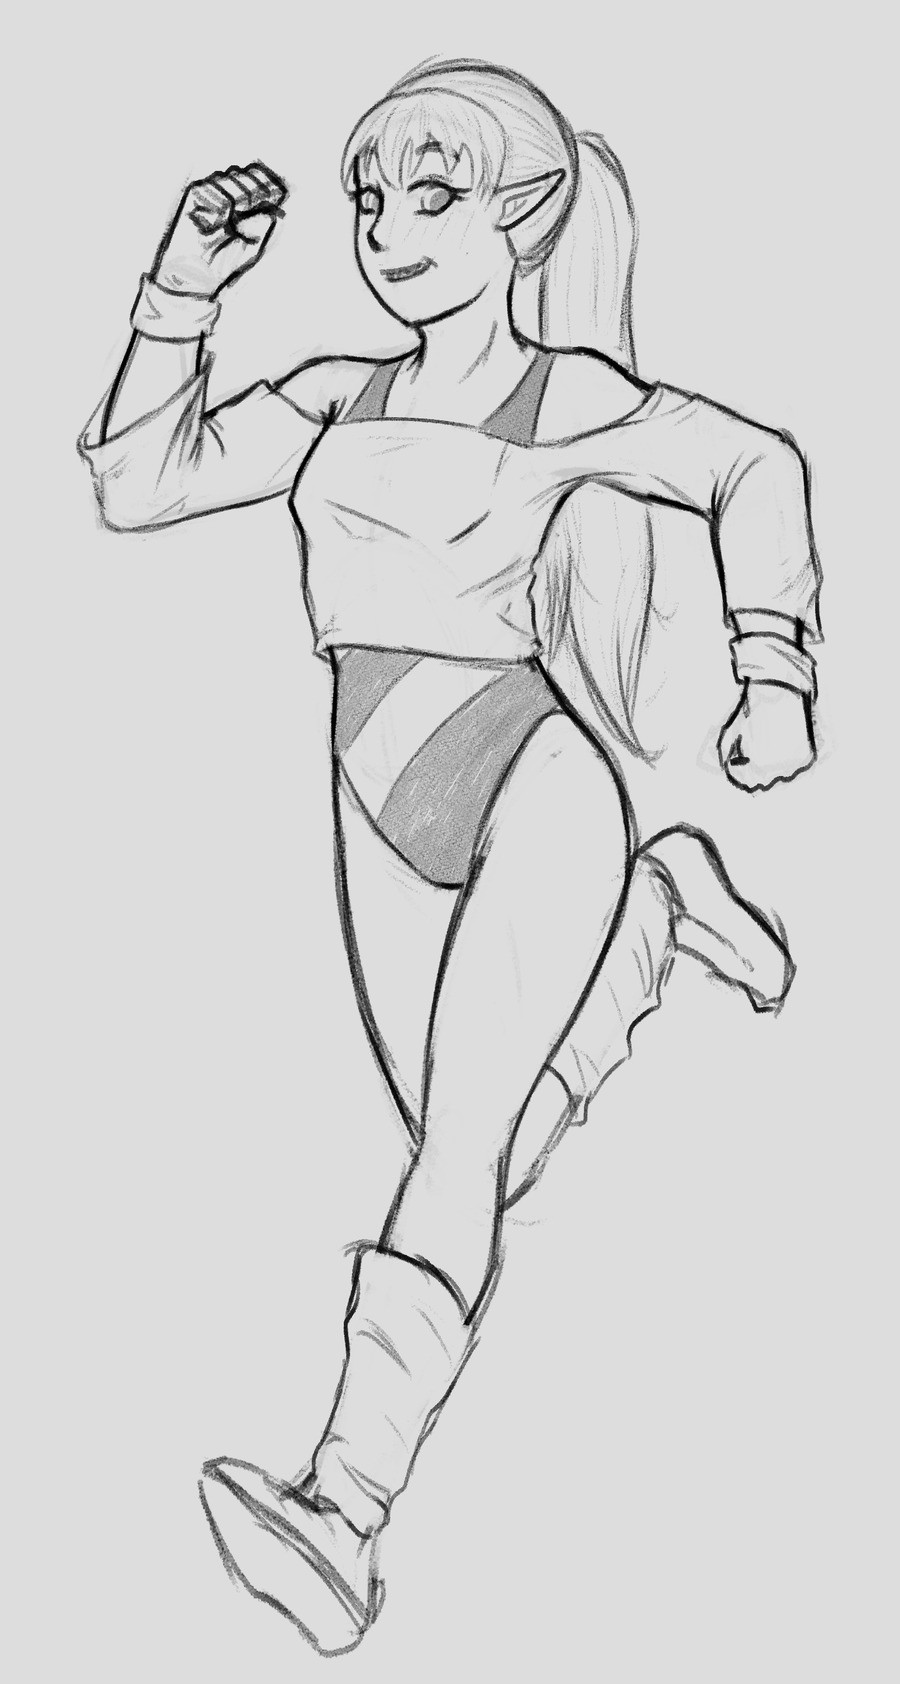 OC-tober 2021 day 18. Day 18 is 80s workout clothes so drew my gal Nia going for a jog join list: DaringDoodles (51 subs)Mention Clicks: 4675Msgs Sent: 3032Ment